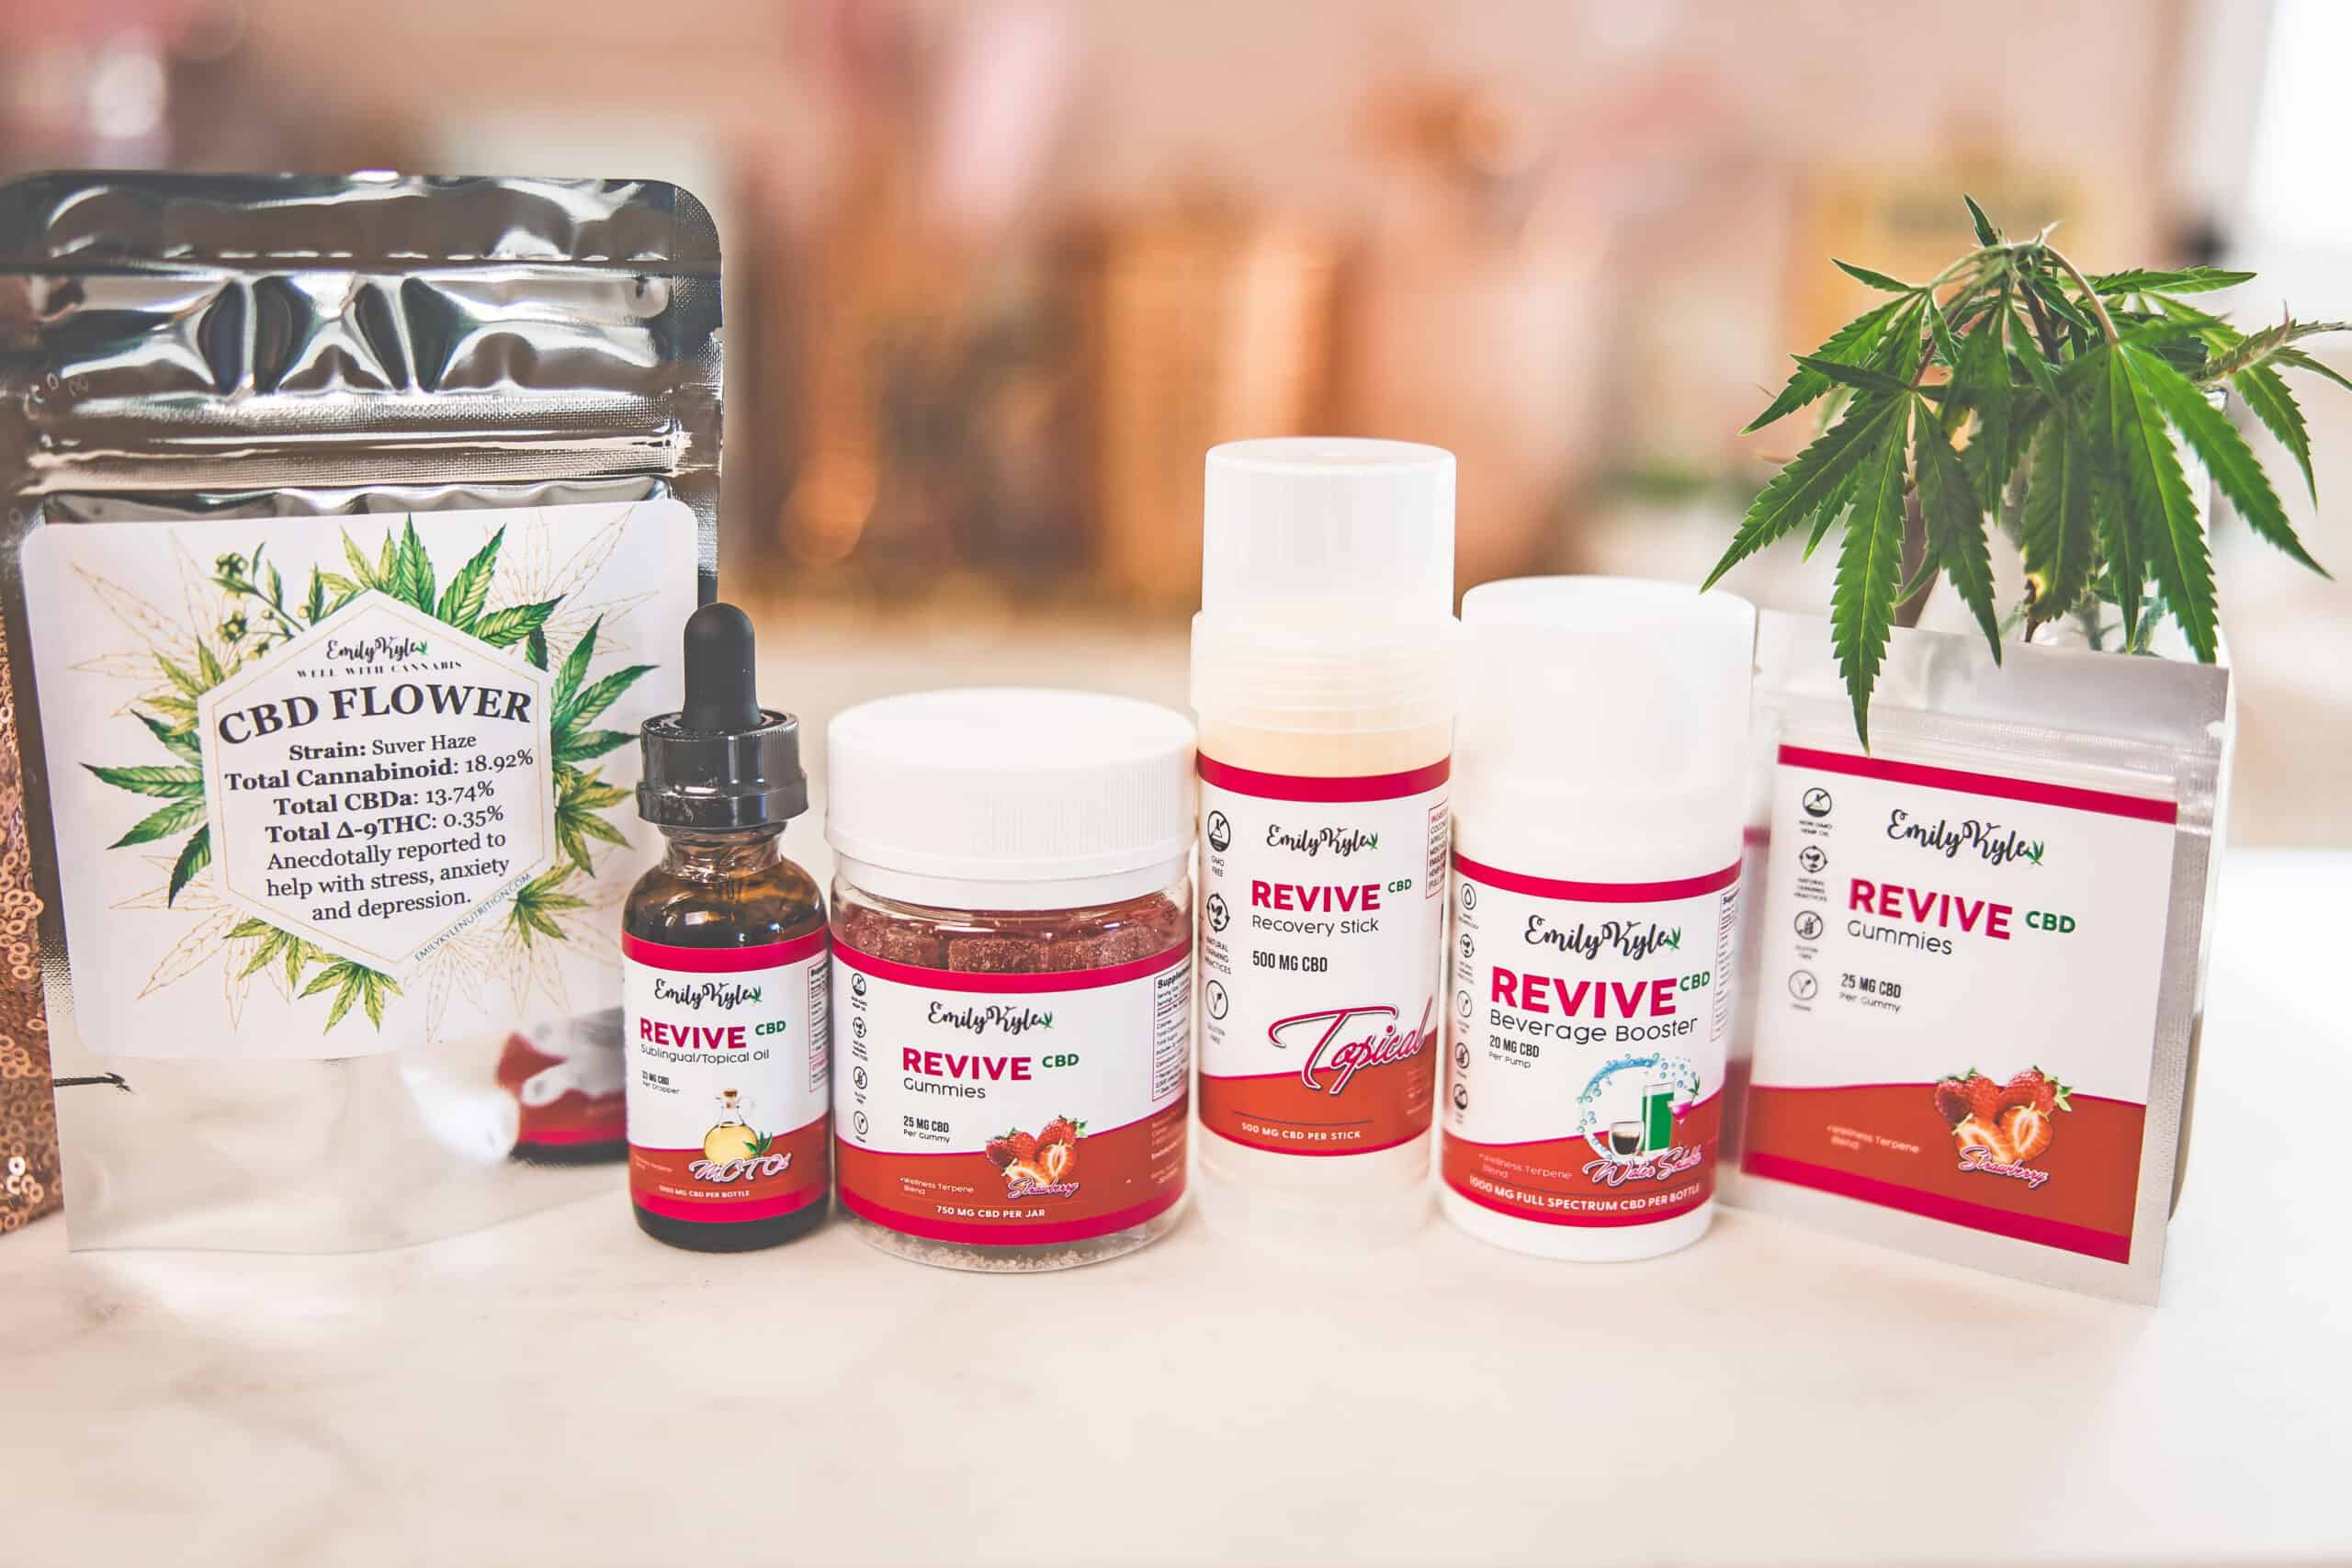 A picture of Emily Kyles CBD product line.